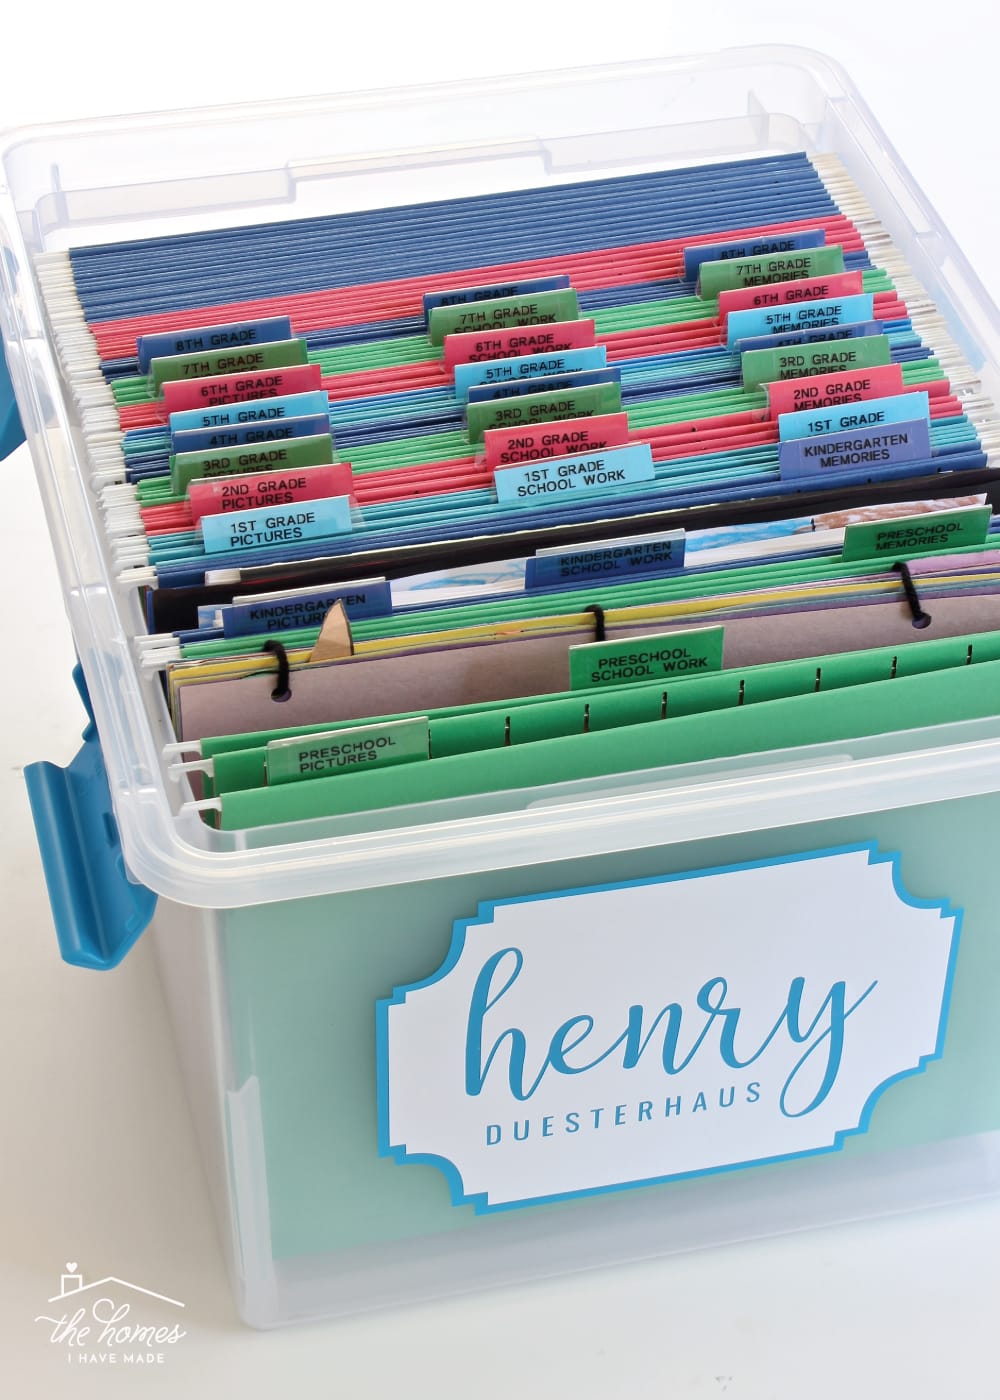 From permission slips to art projects, pictures and memories, get lots of ideas for organizing, sorting and storing kids paperwork!